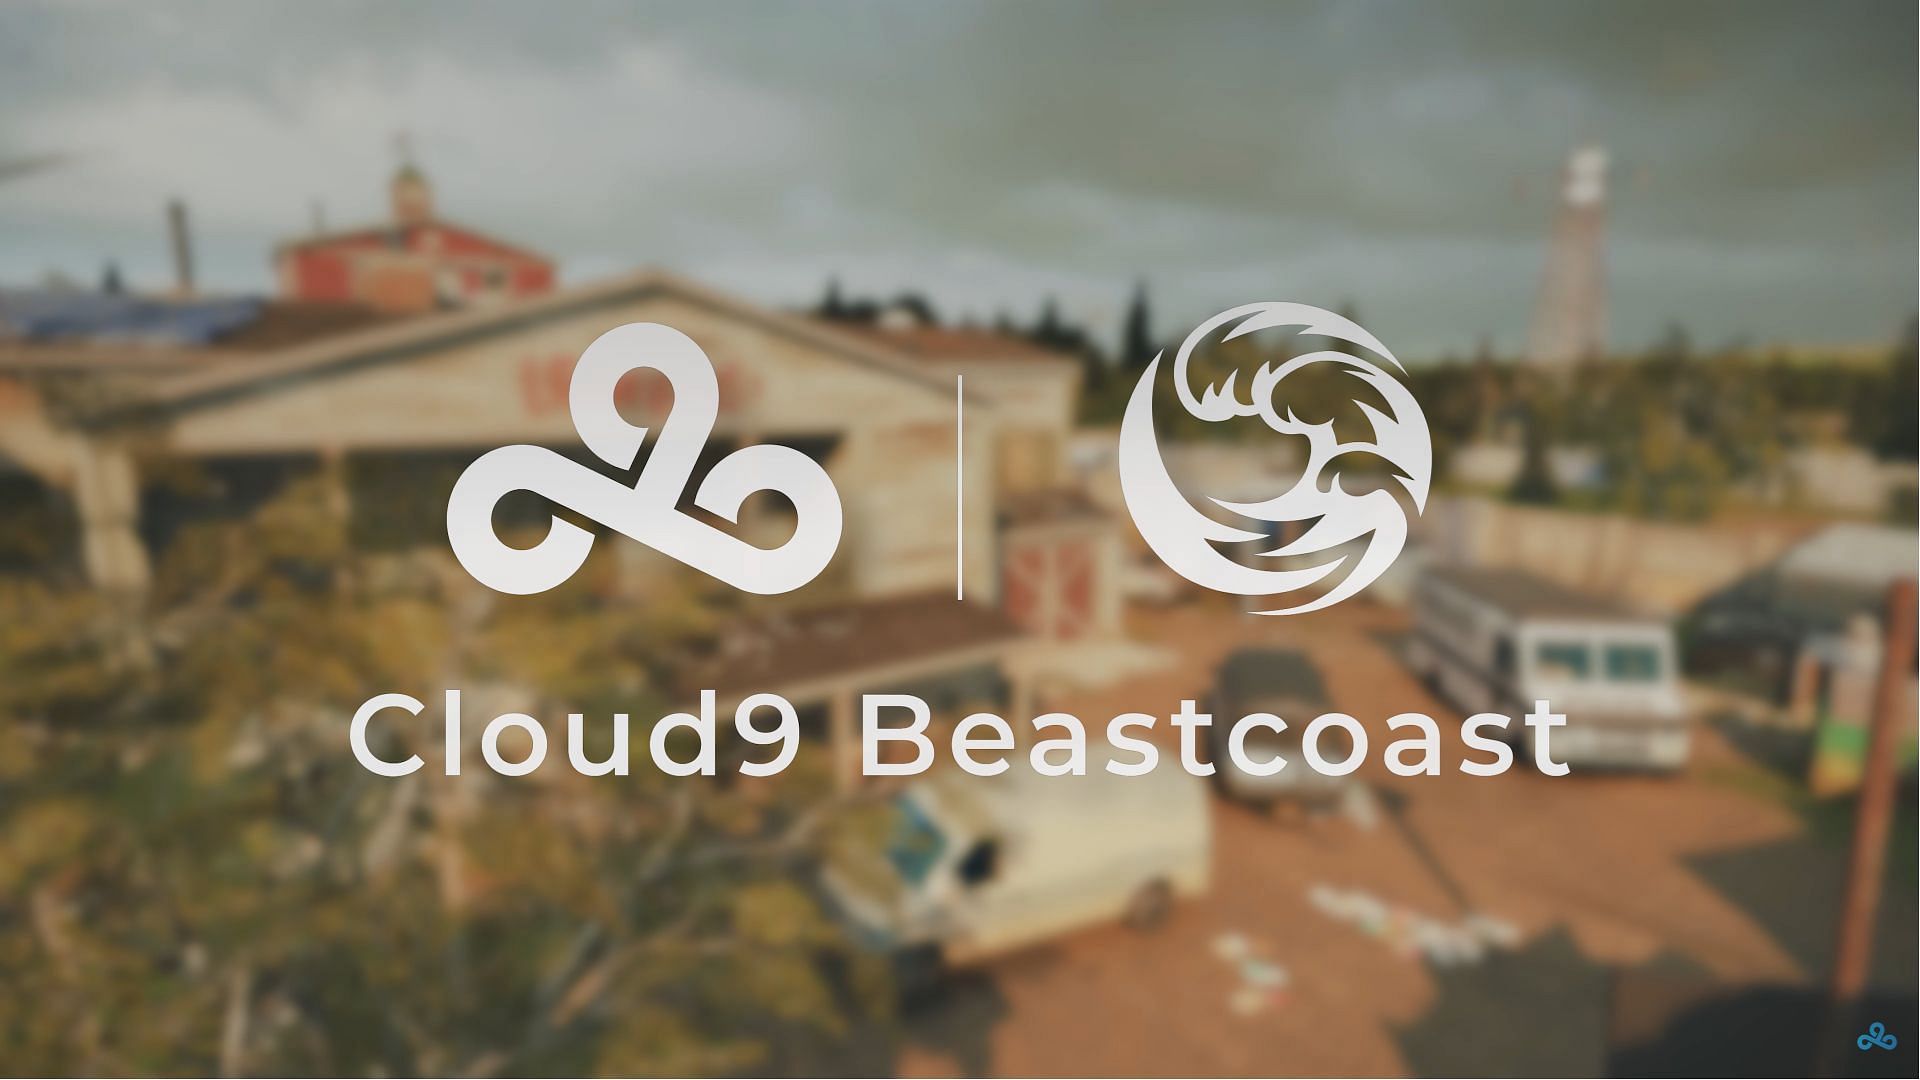 Cloud9 rejoined the R6 esports scene with collaboration with Beastcoast (Image via YouTube/@Cloud9)